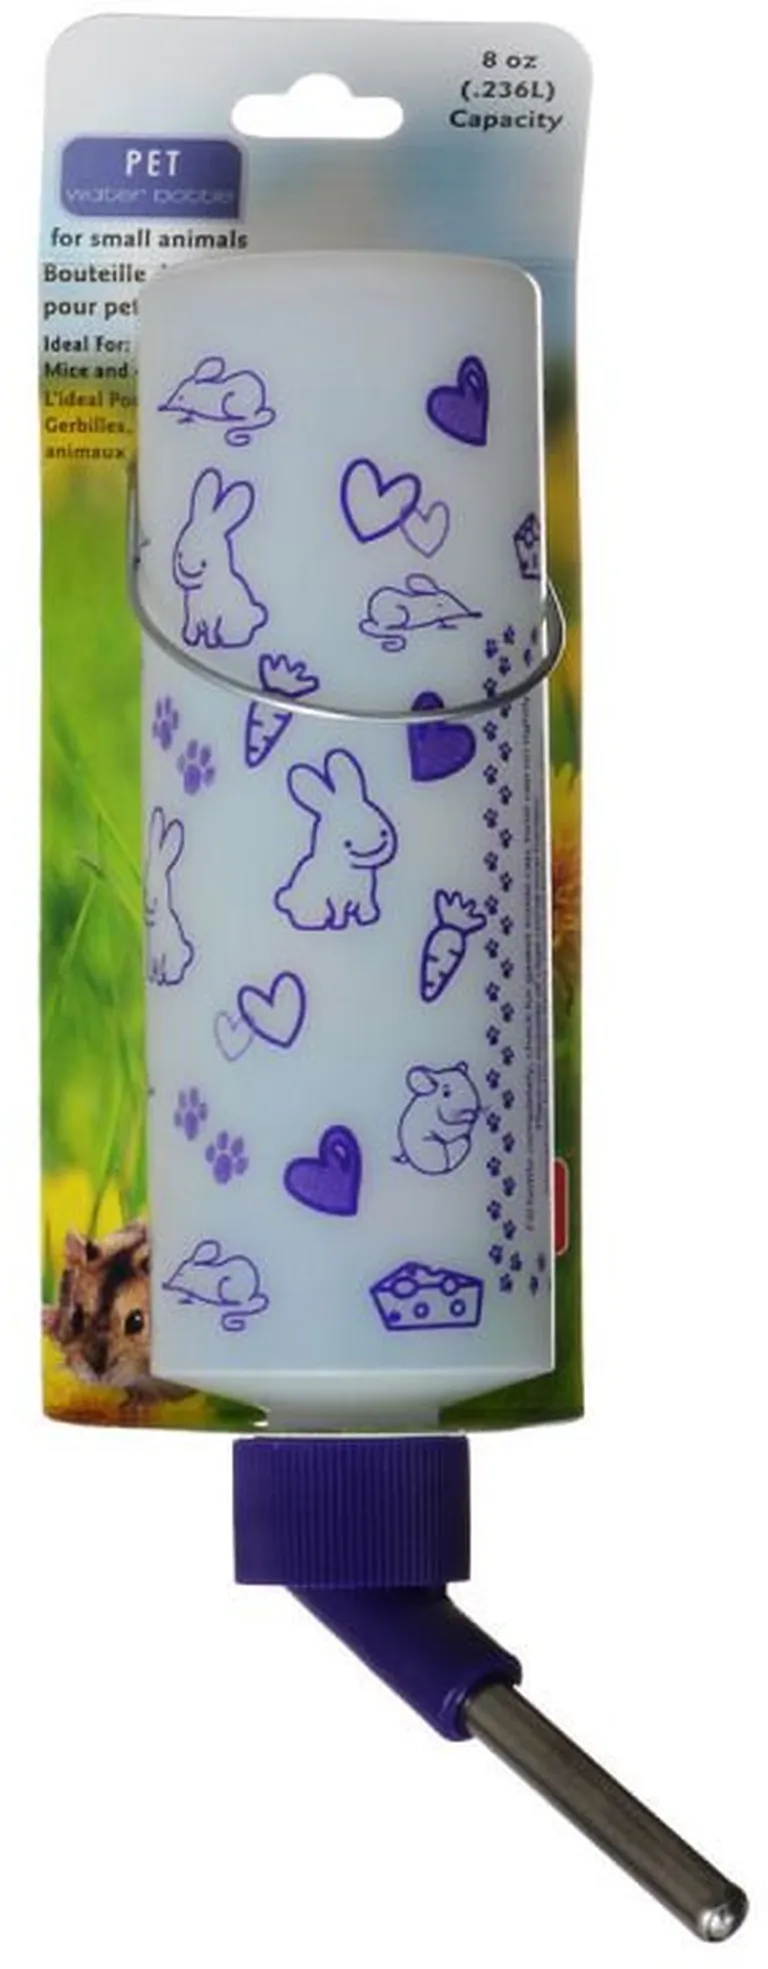 Lixit Pet Water Bottle for Small Animals Photo 1